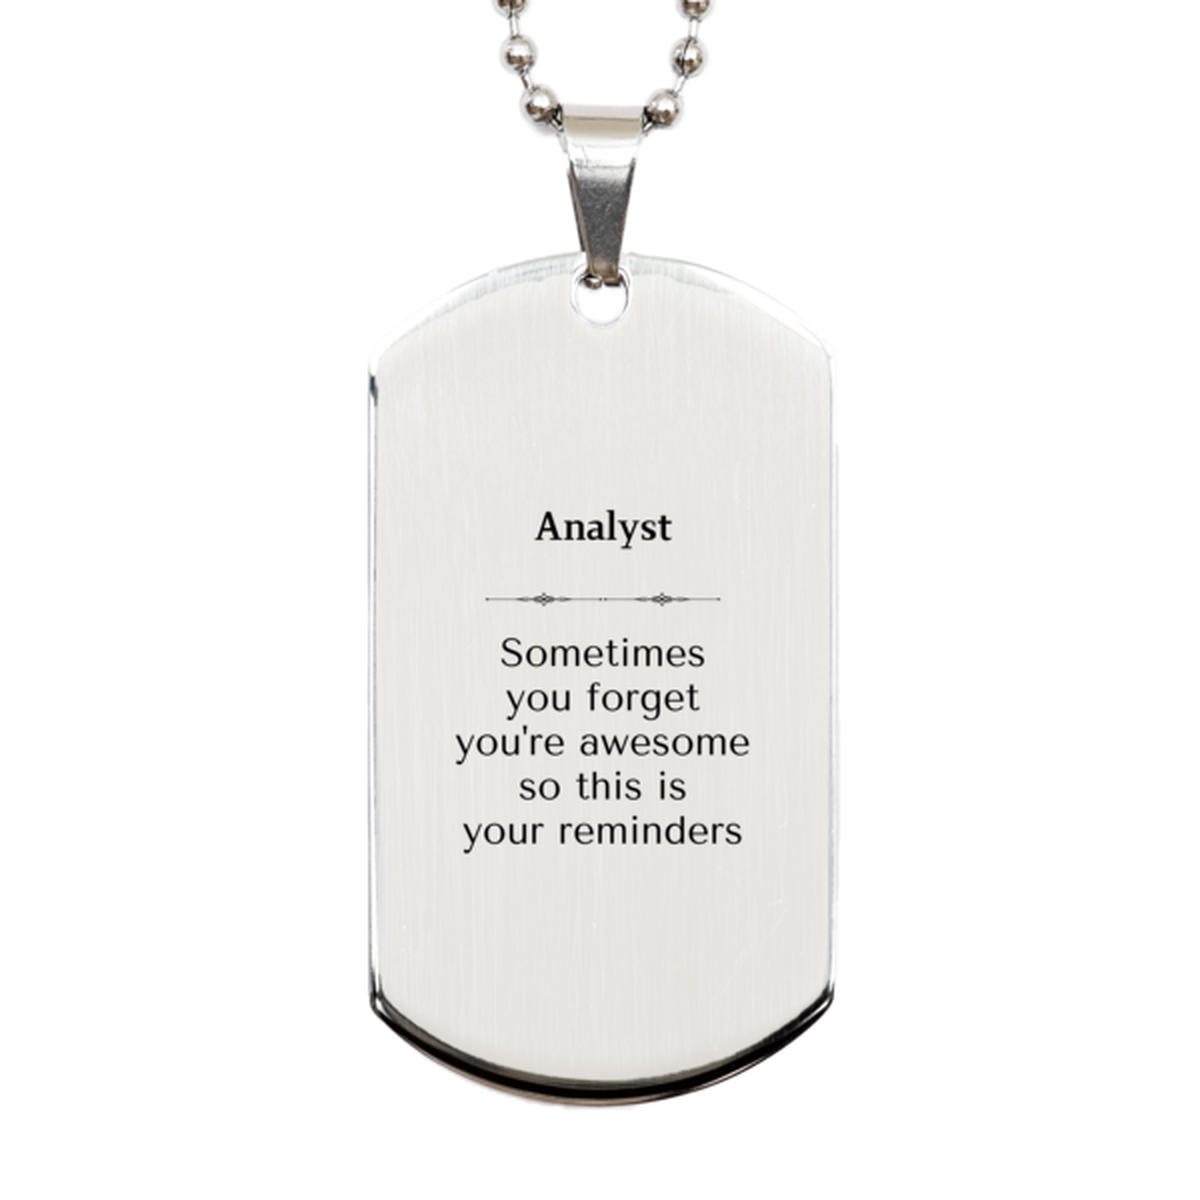 Sentimental Analyst Silver Dog Tag, Analyst Sometimes you forget you're awesome so this is your reminders, Graduation Christmas Birthday Gifts for Analyst, Men, Women, Coworkers